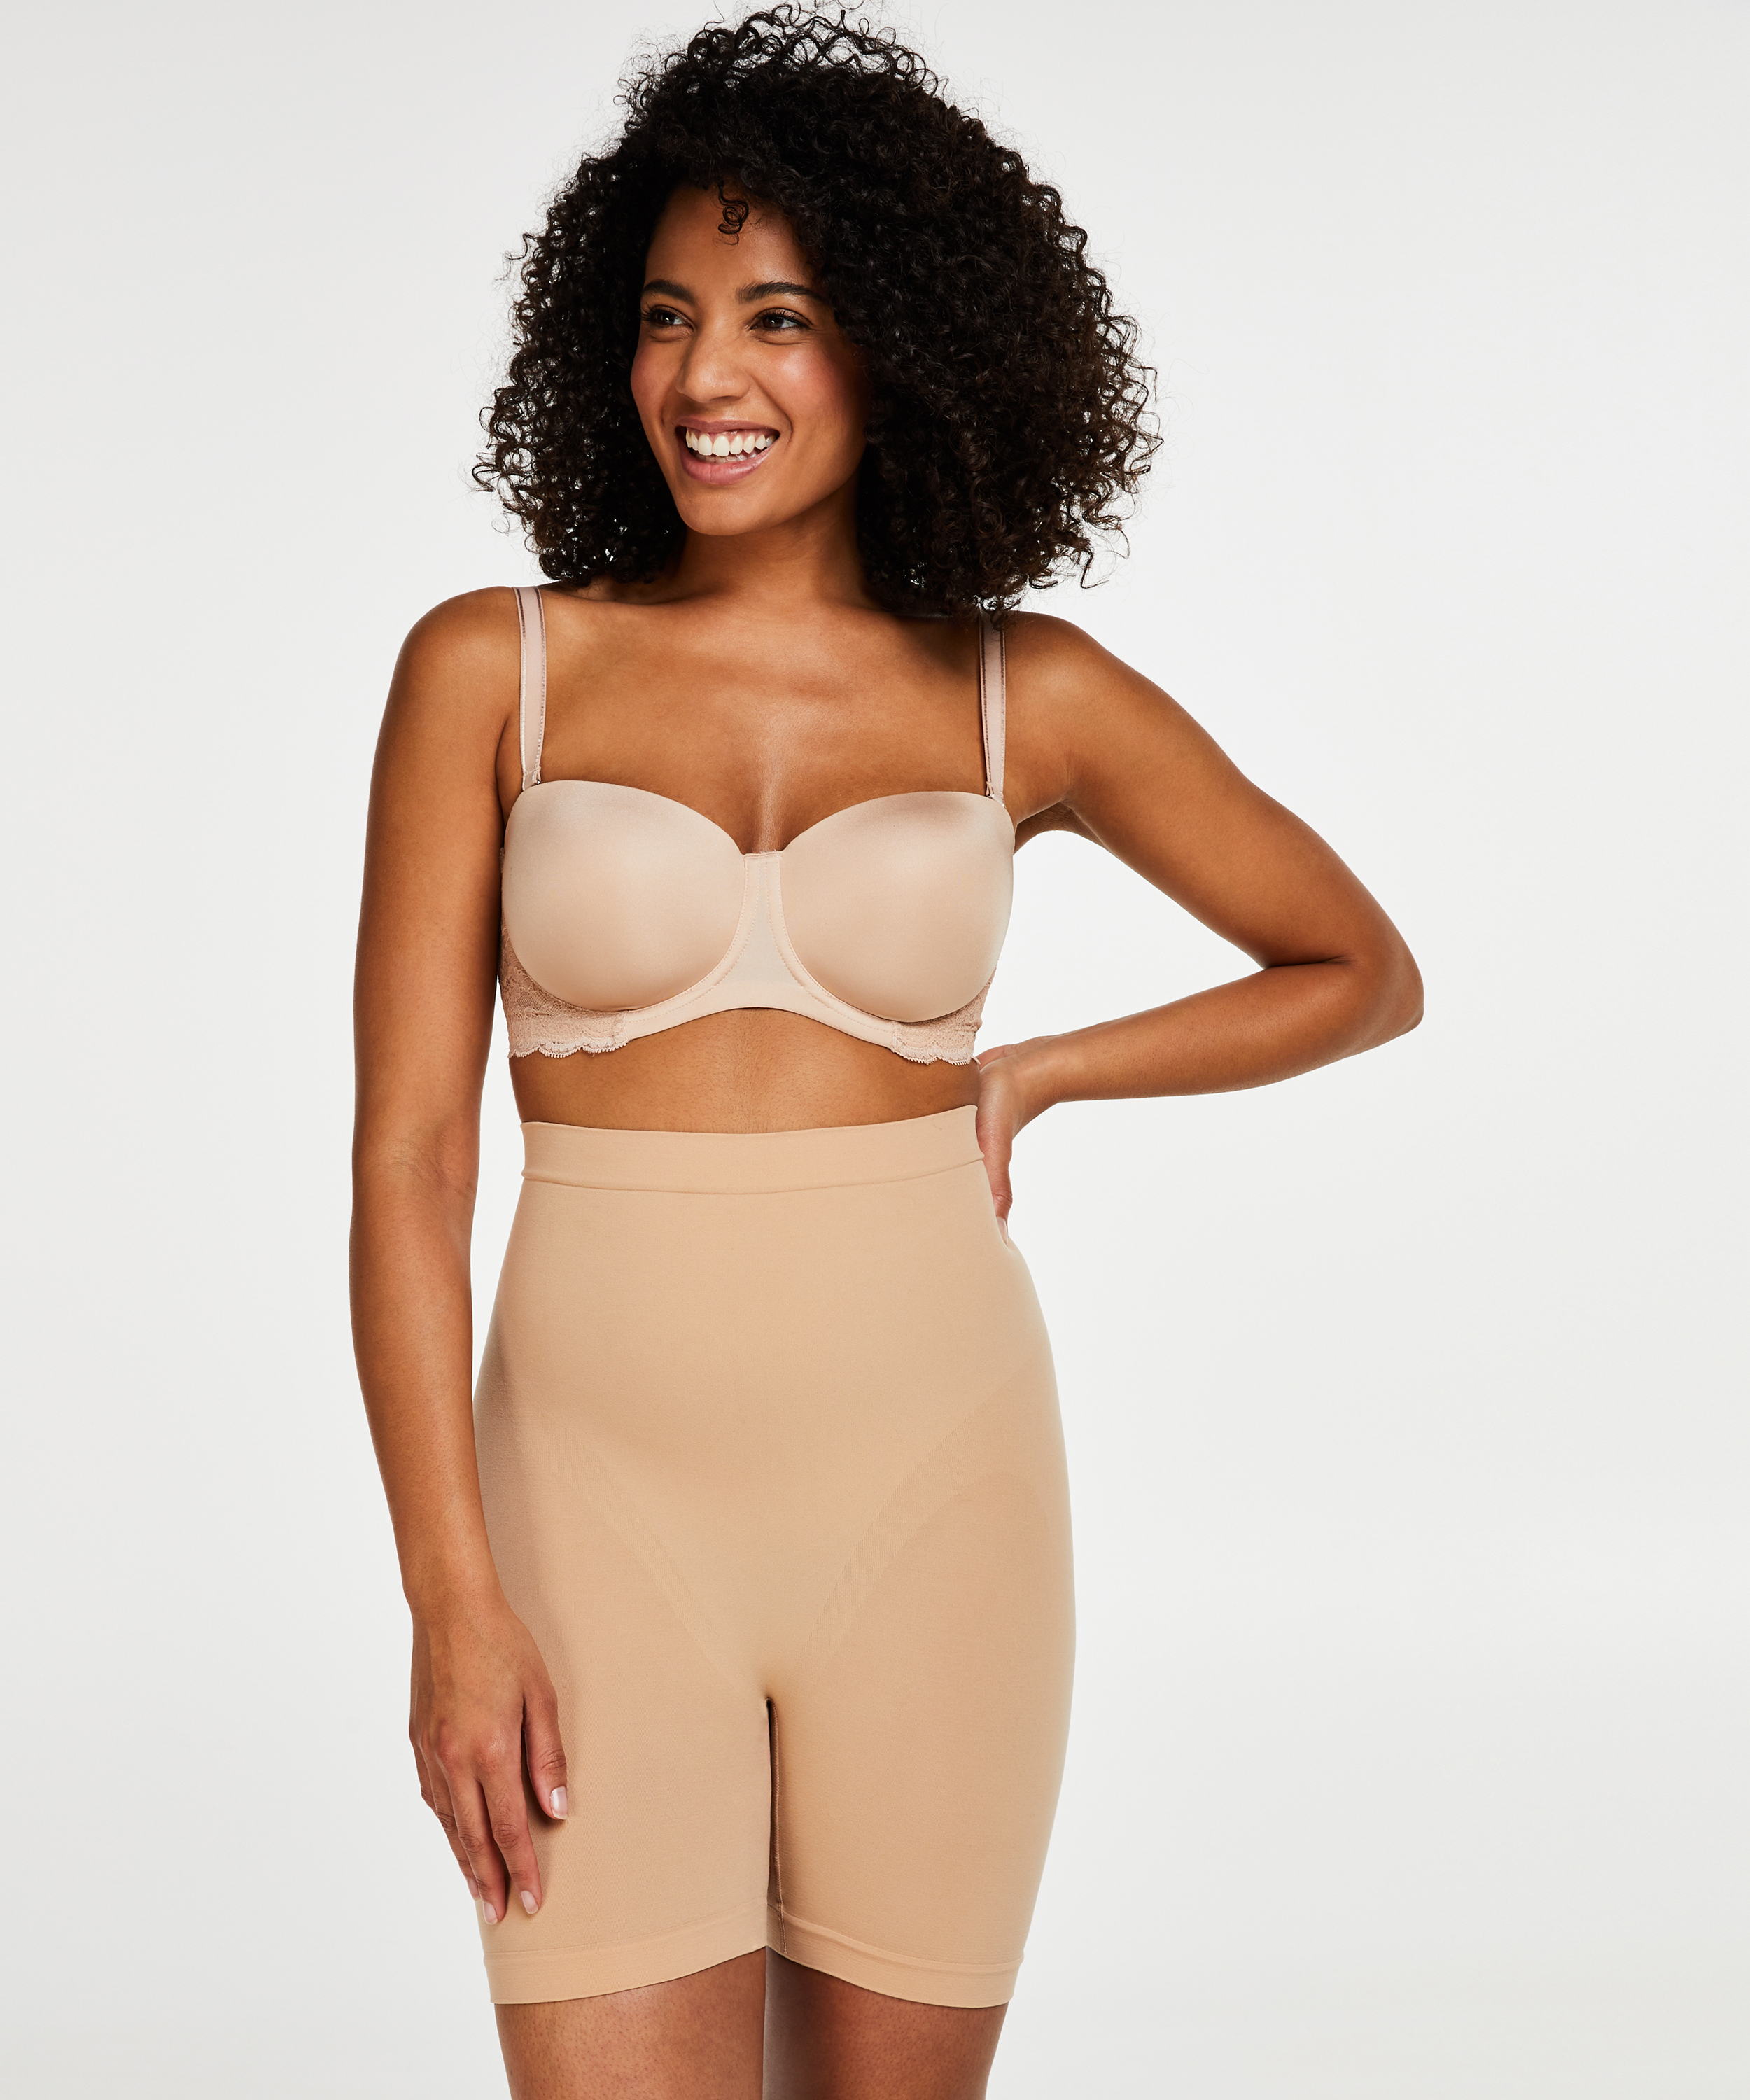 map constante Snel Firming high waisted thigh slimmer - Level 2 for €22.99 - Shapewear -  Hunkemöller